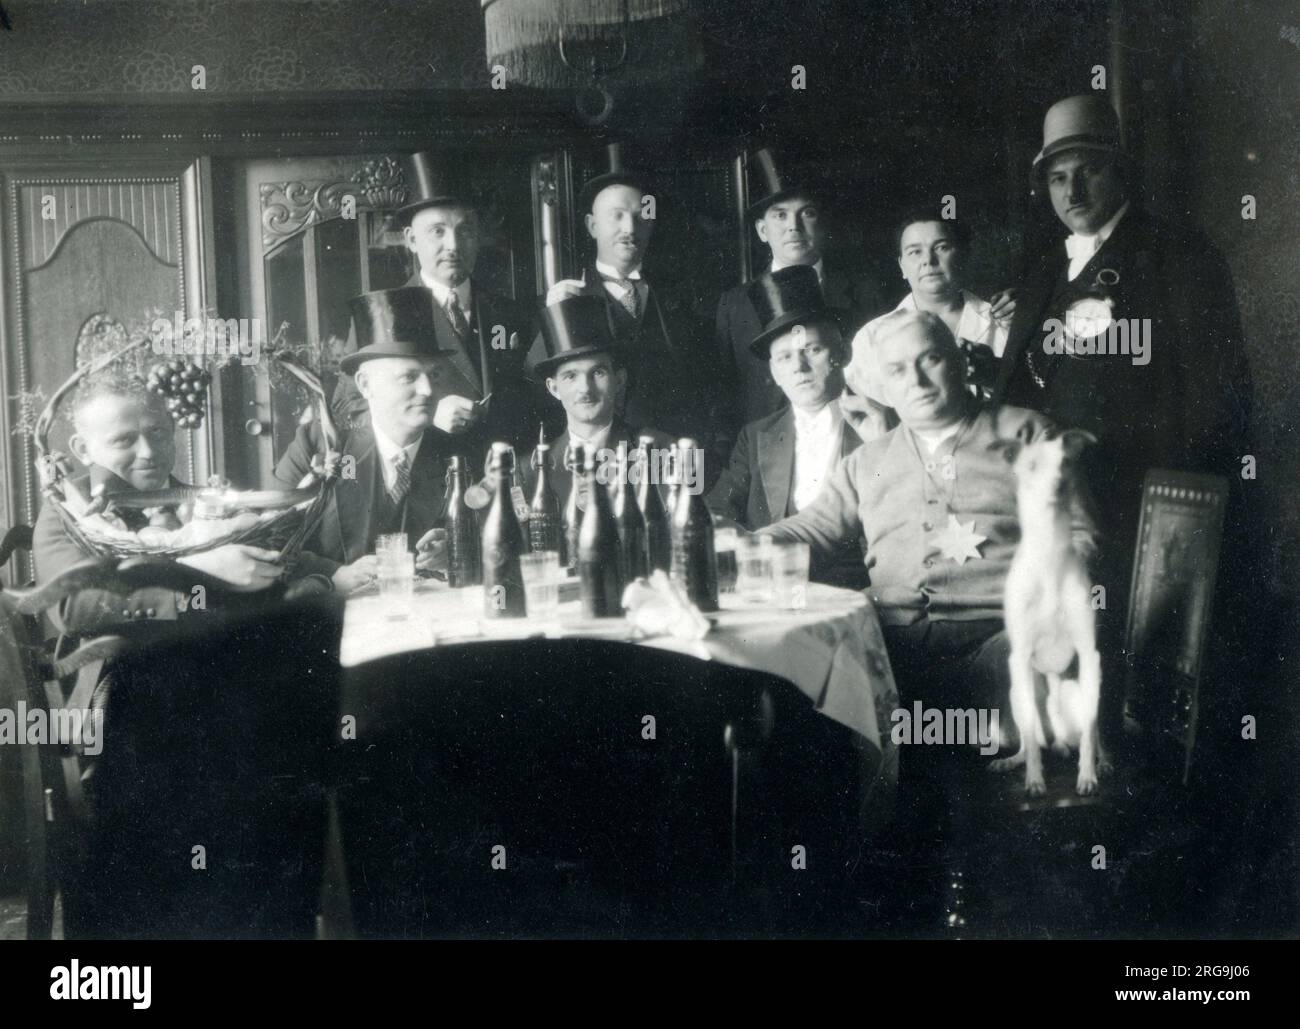 A jolly men's drinking club - the table is well stocked with beer and glasses and everyone is very smartly-dressed in top hats ans suits, some with additonal 'badges of office'! Stock Photo